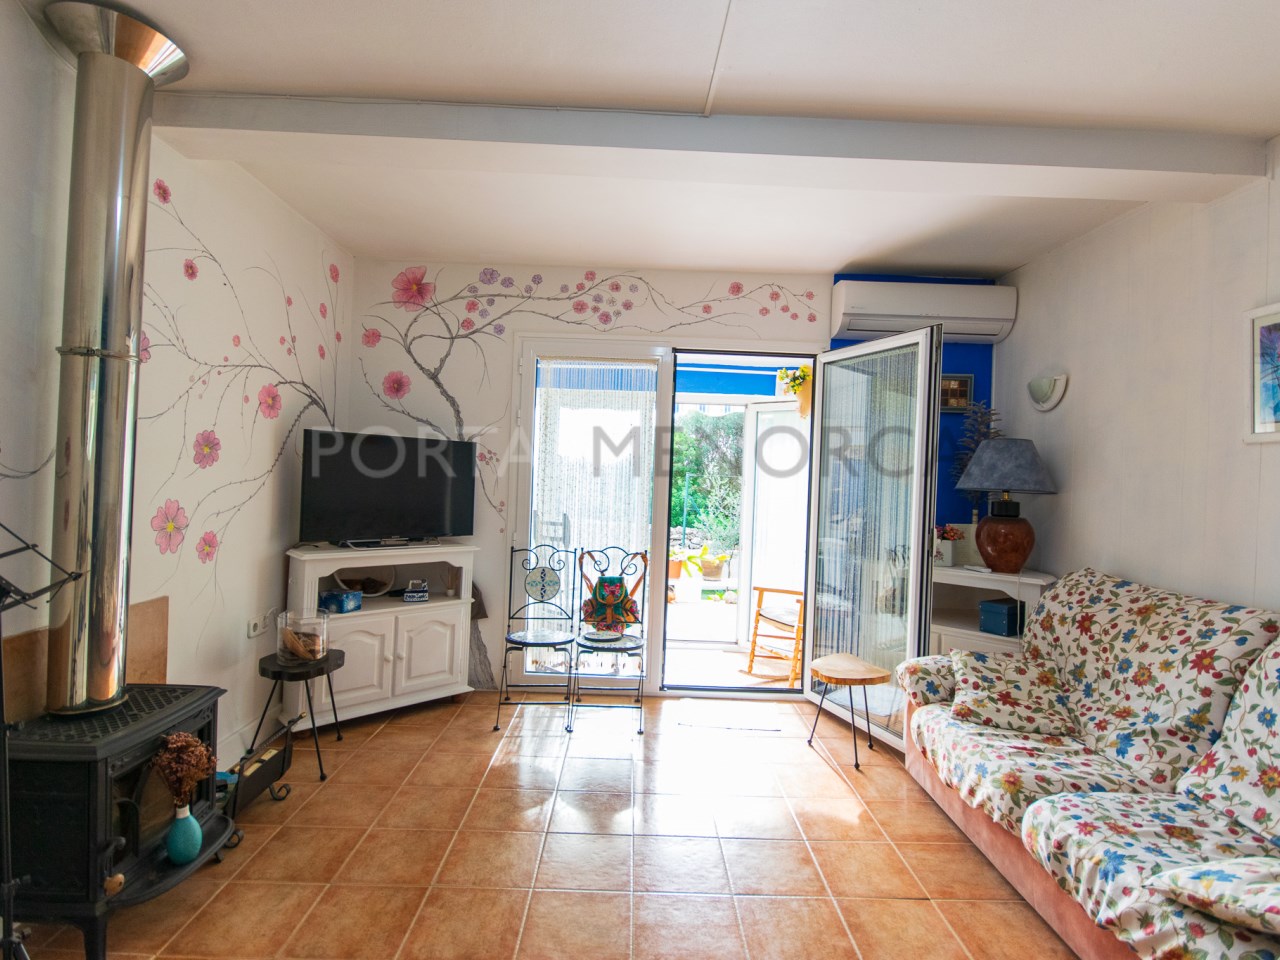 Living-dining room of two-bedroom townhouse for sale in Cales Coves